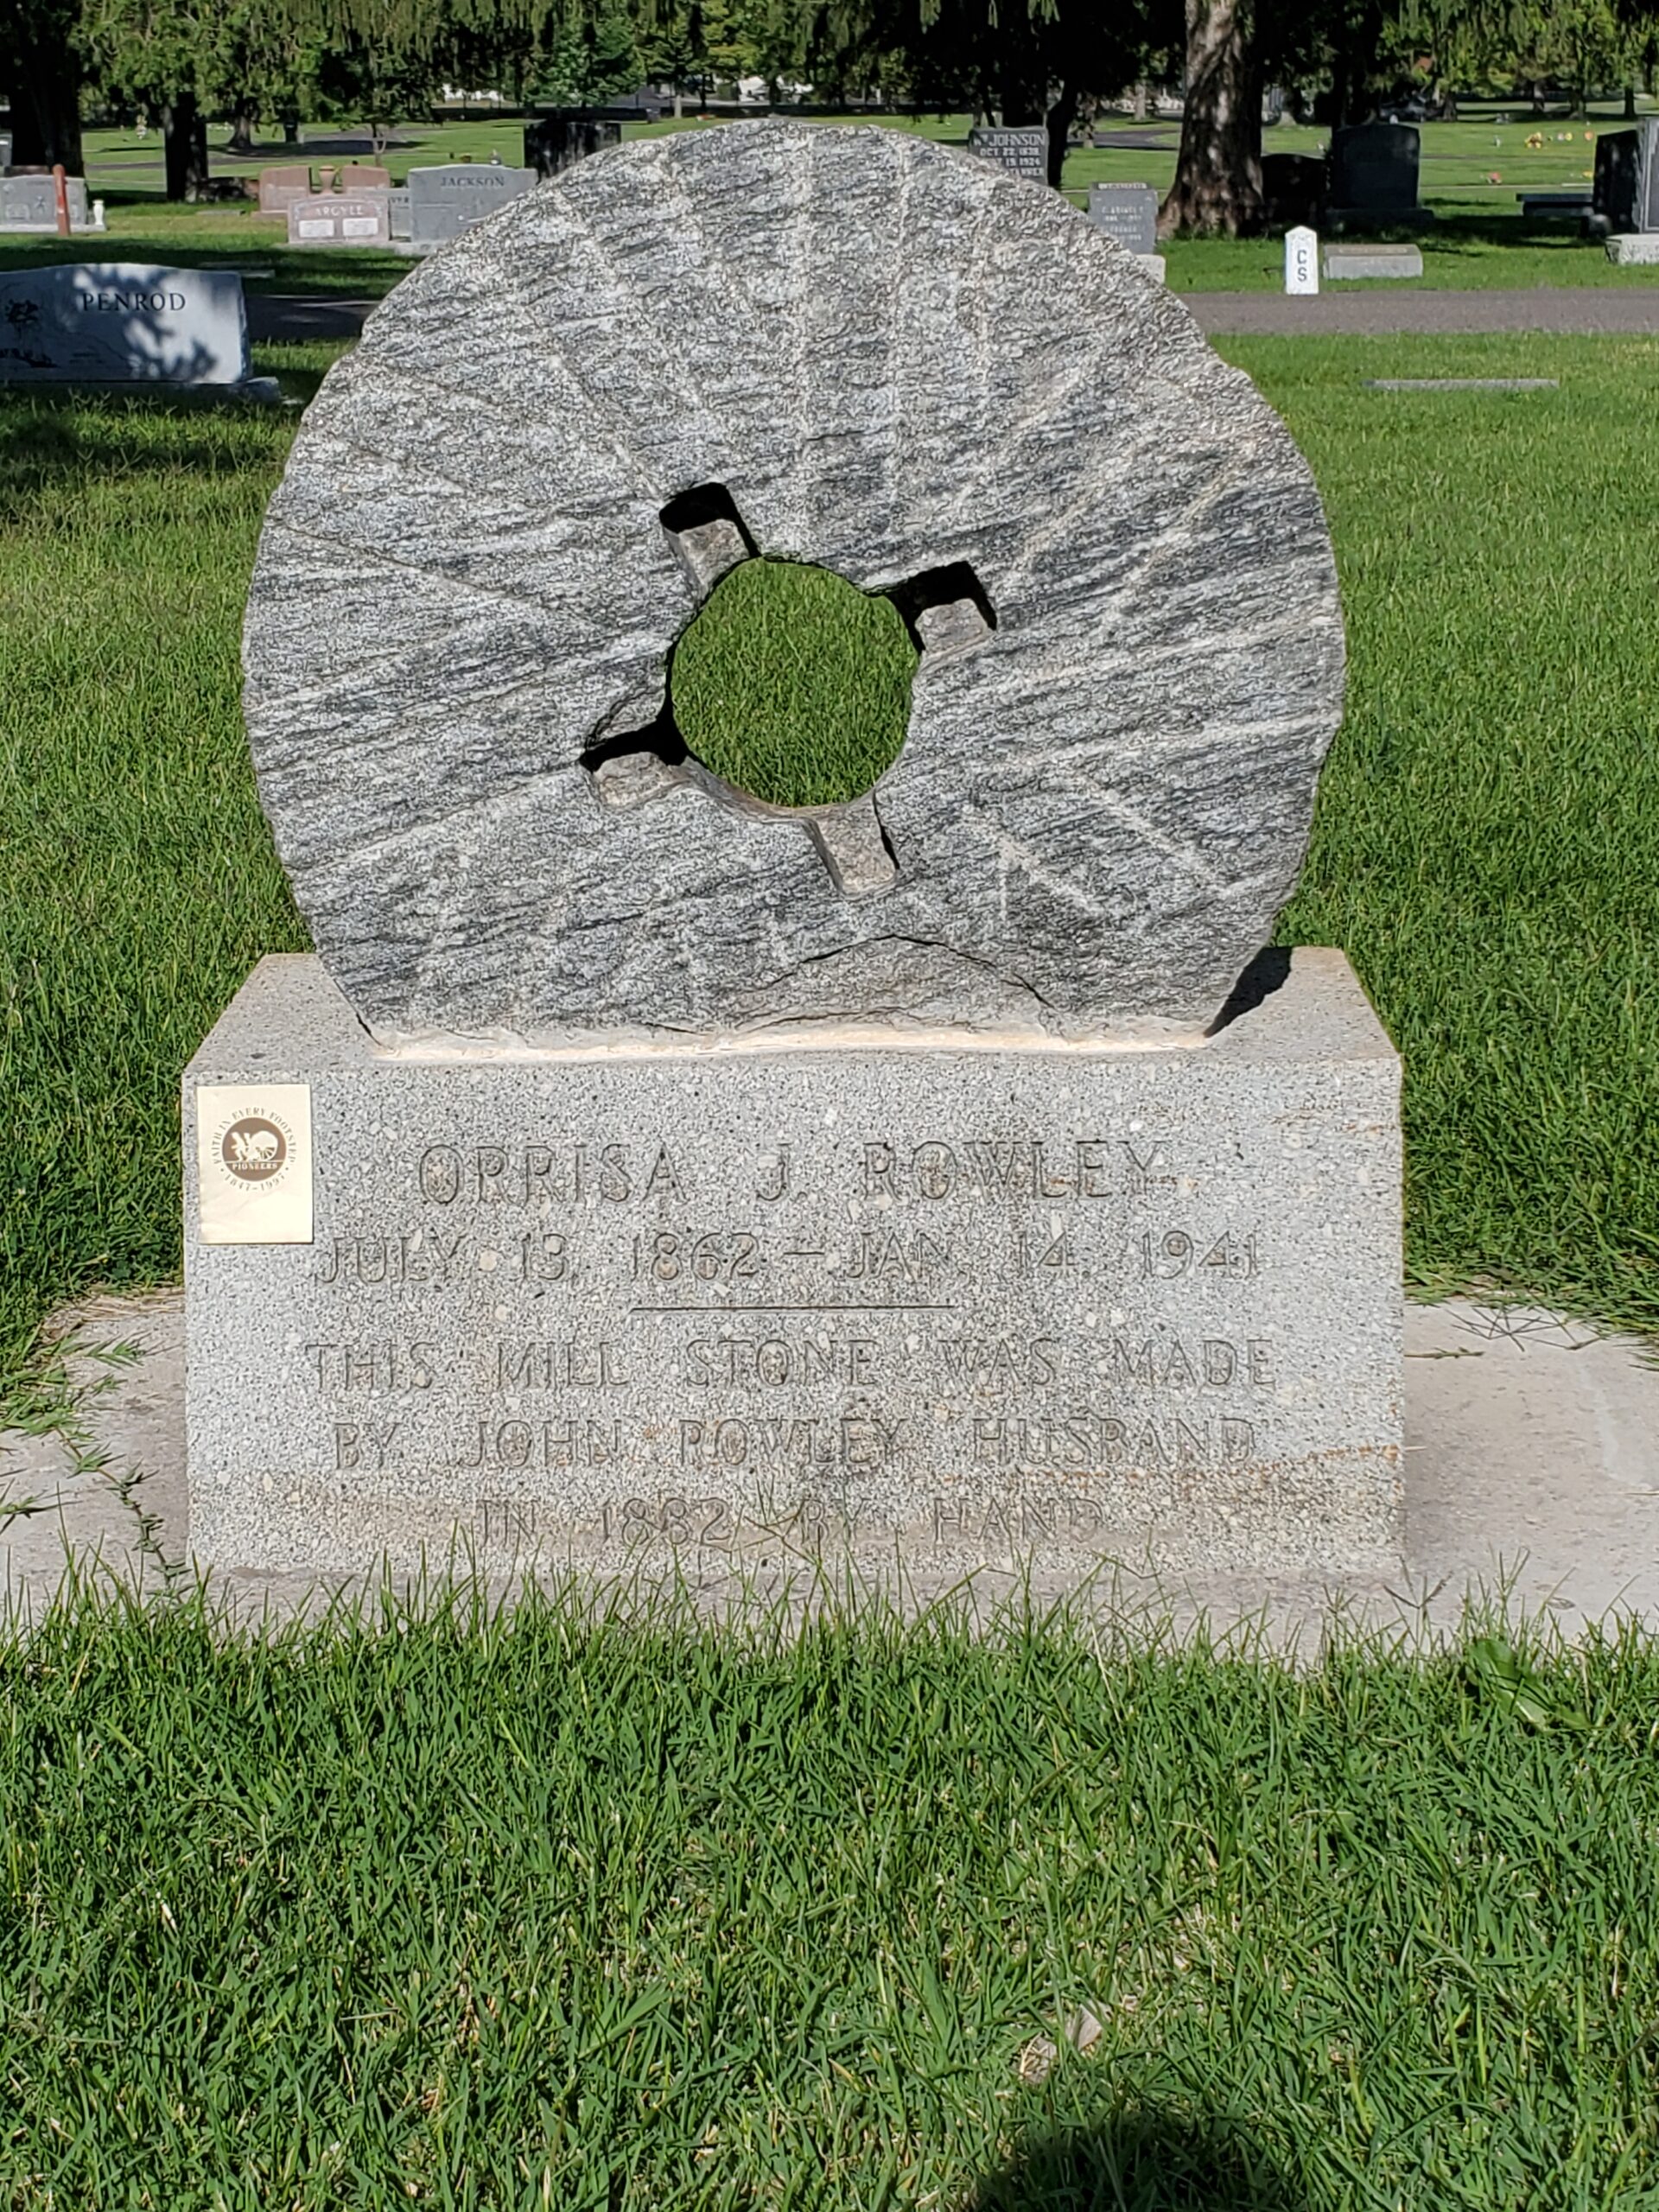 This grave is marked with a millstone made by the deceased's husband in the 1800's